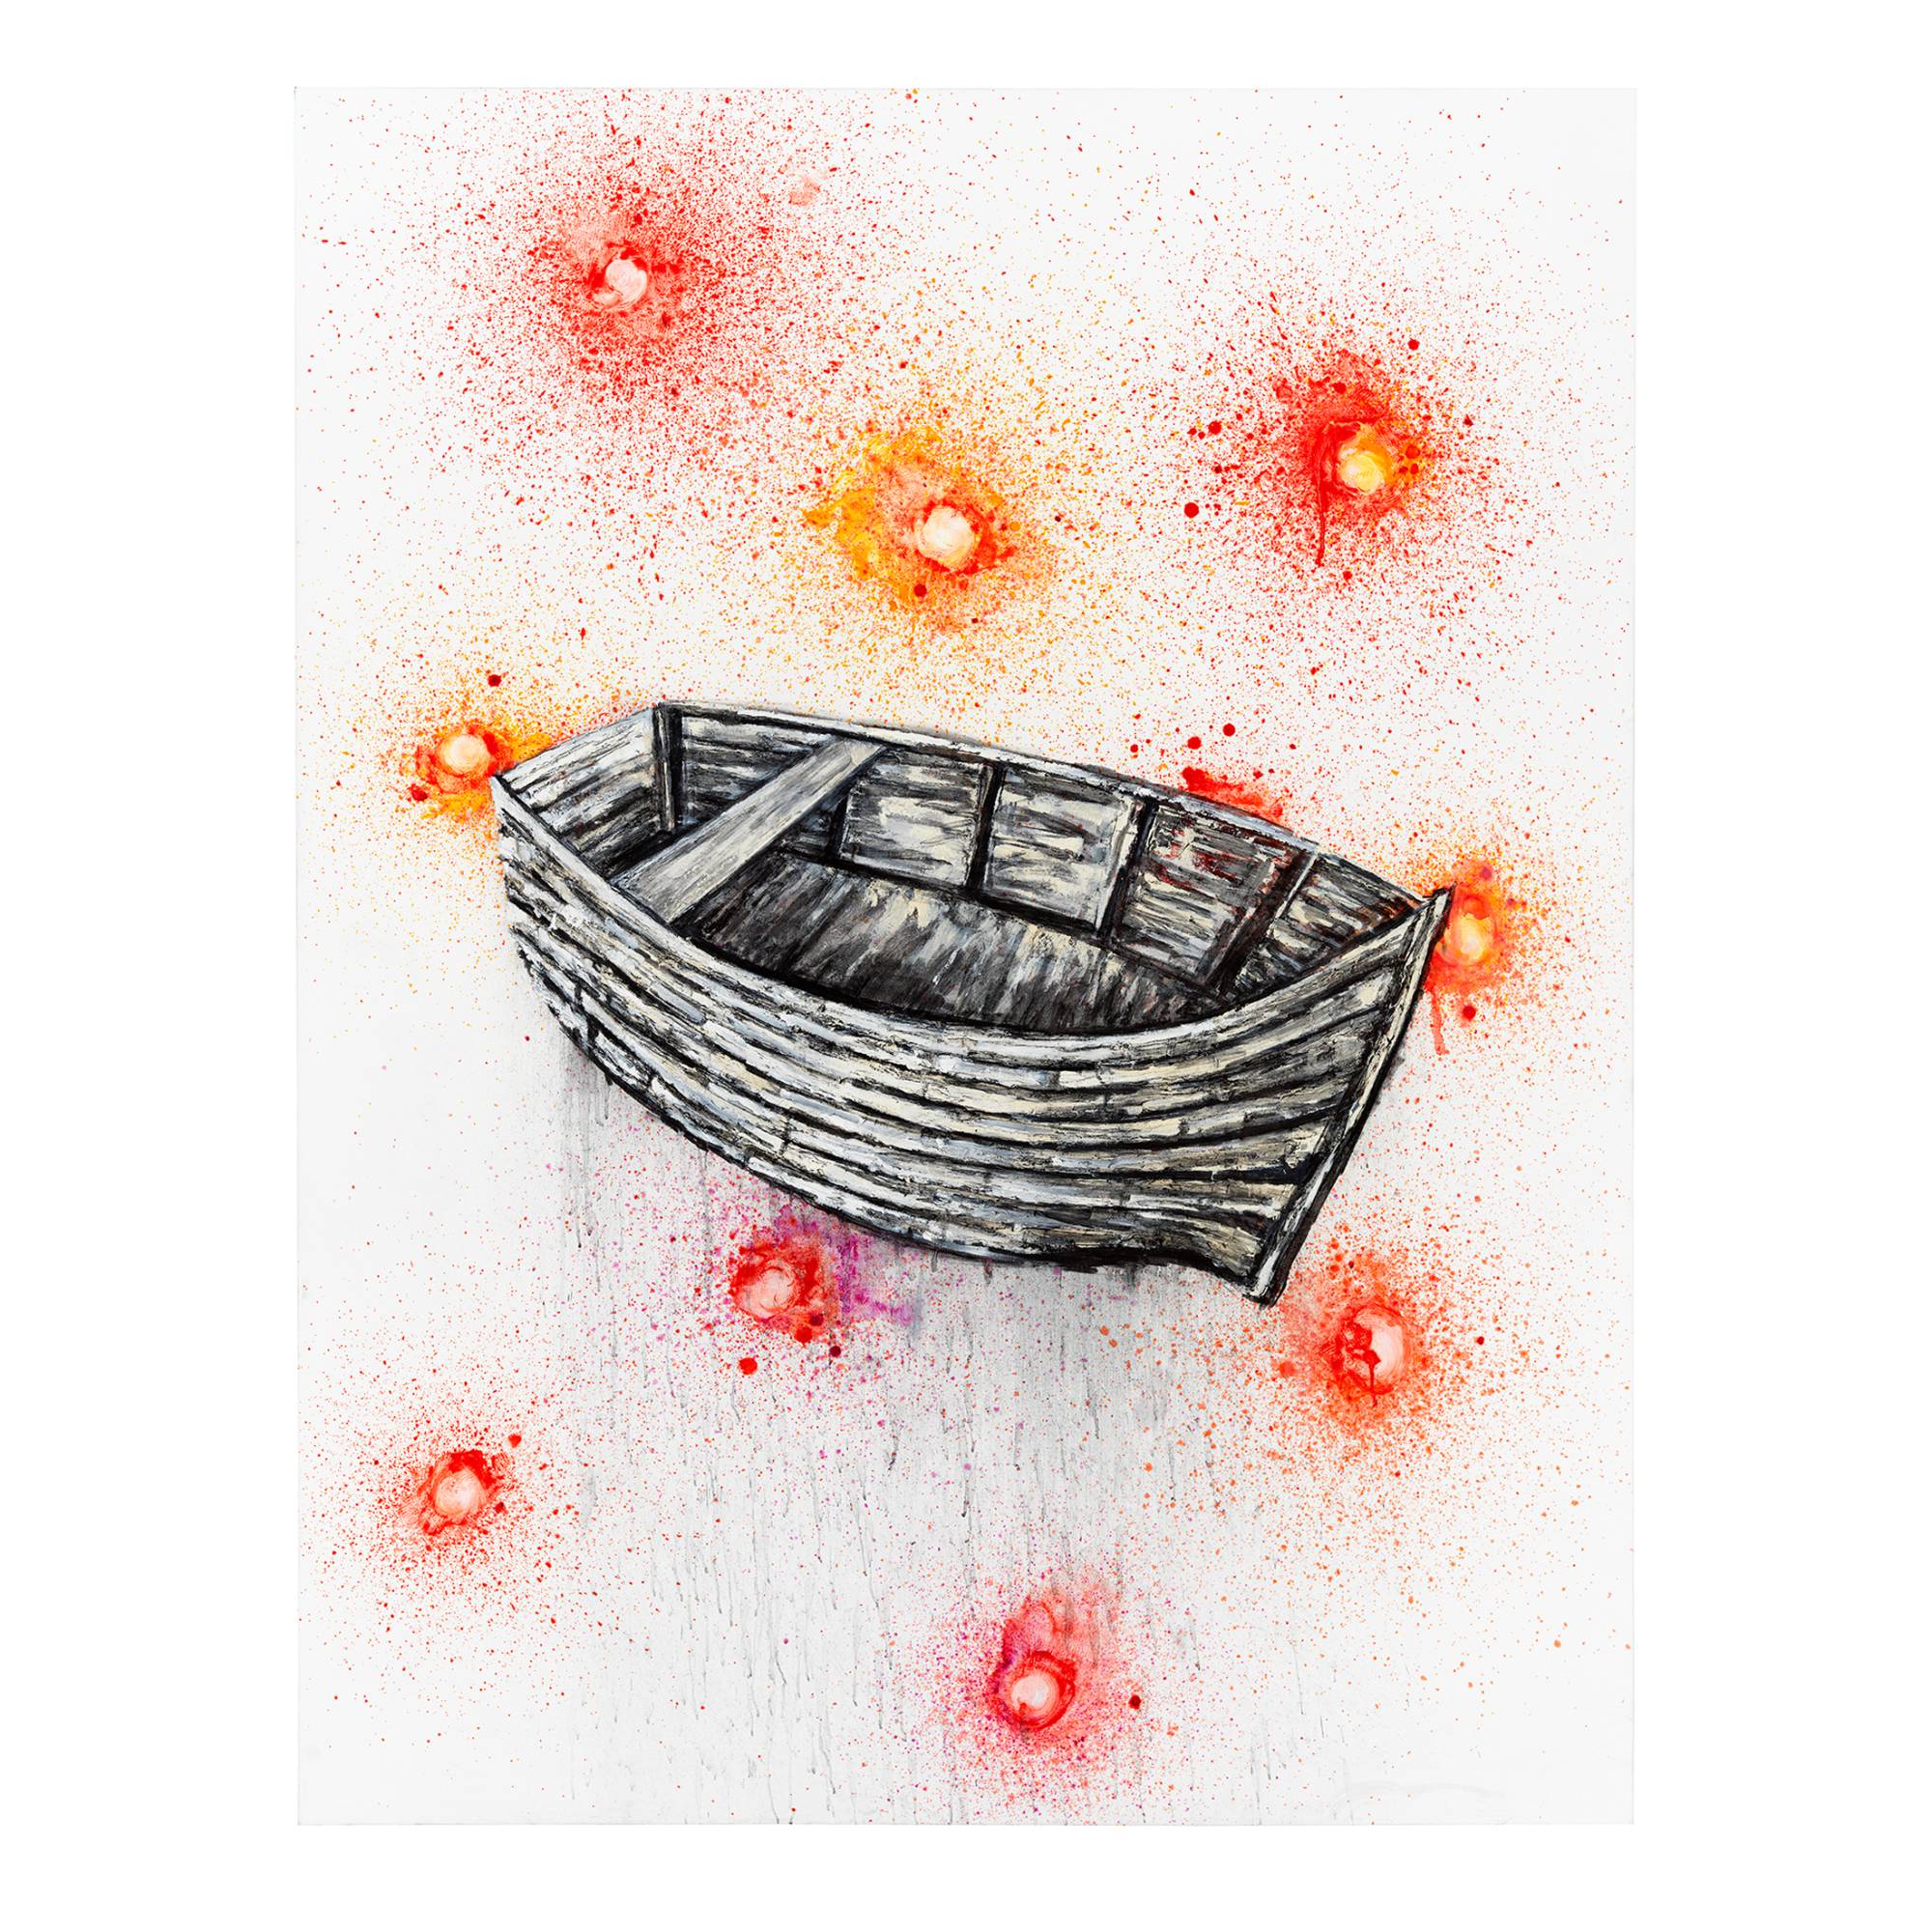 Painting by Vera Klement titled 'Strange Flowers' depicting a row boat on a white background surrounded by 10 paint splatters in bright reds, orange, and yellow resembling wounds